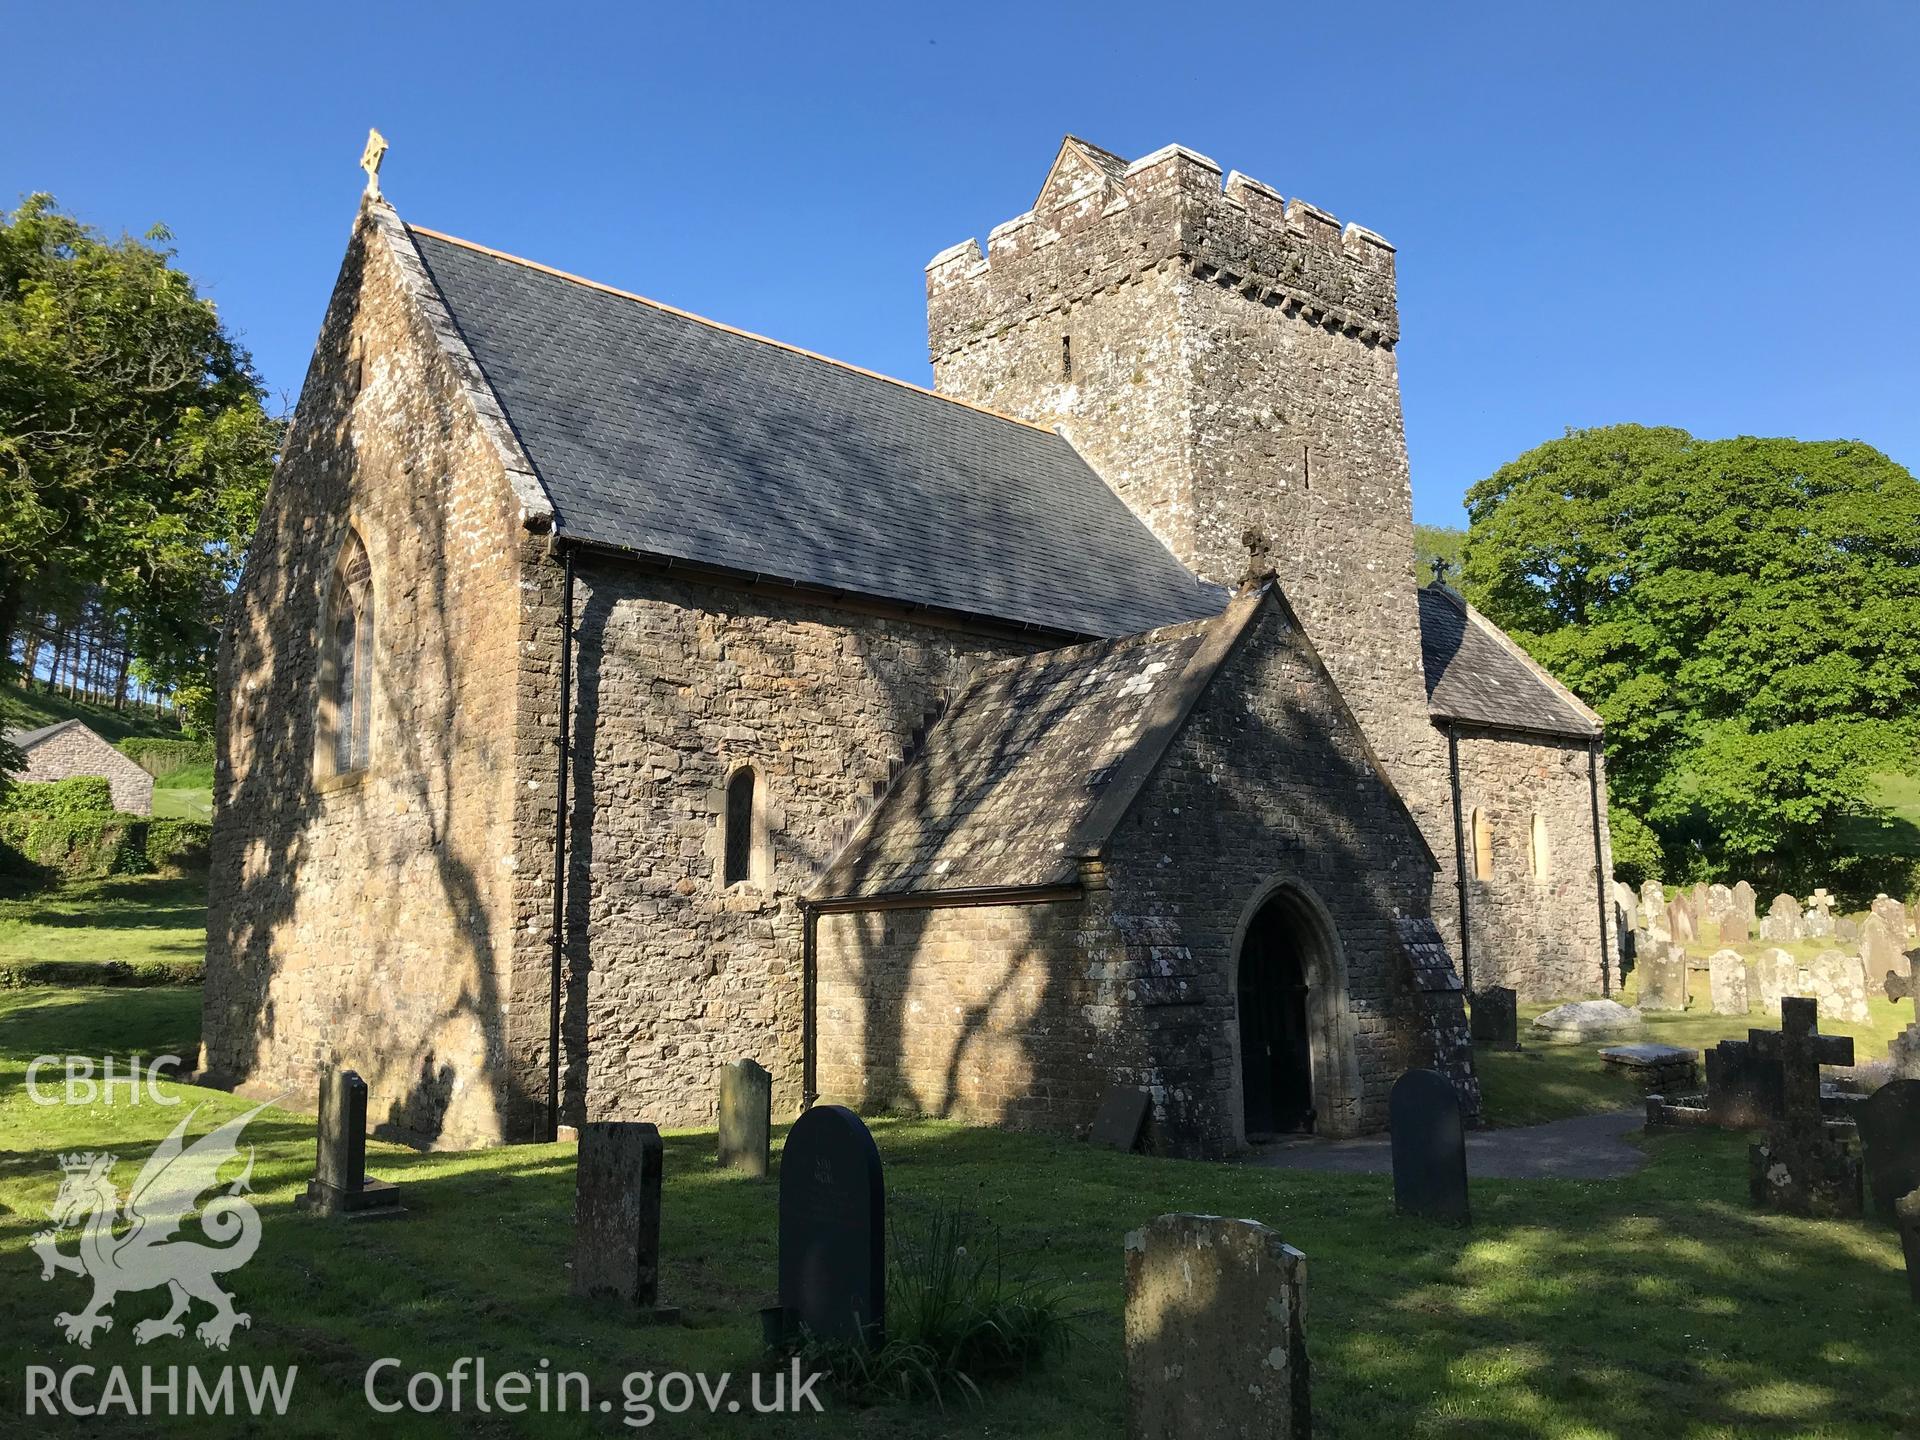 Colour photo showing the exterior of St. Cadog's Church, Cheriton, taken by Paul R. Davis, 19th May 2018.